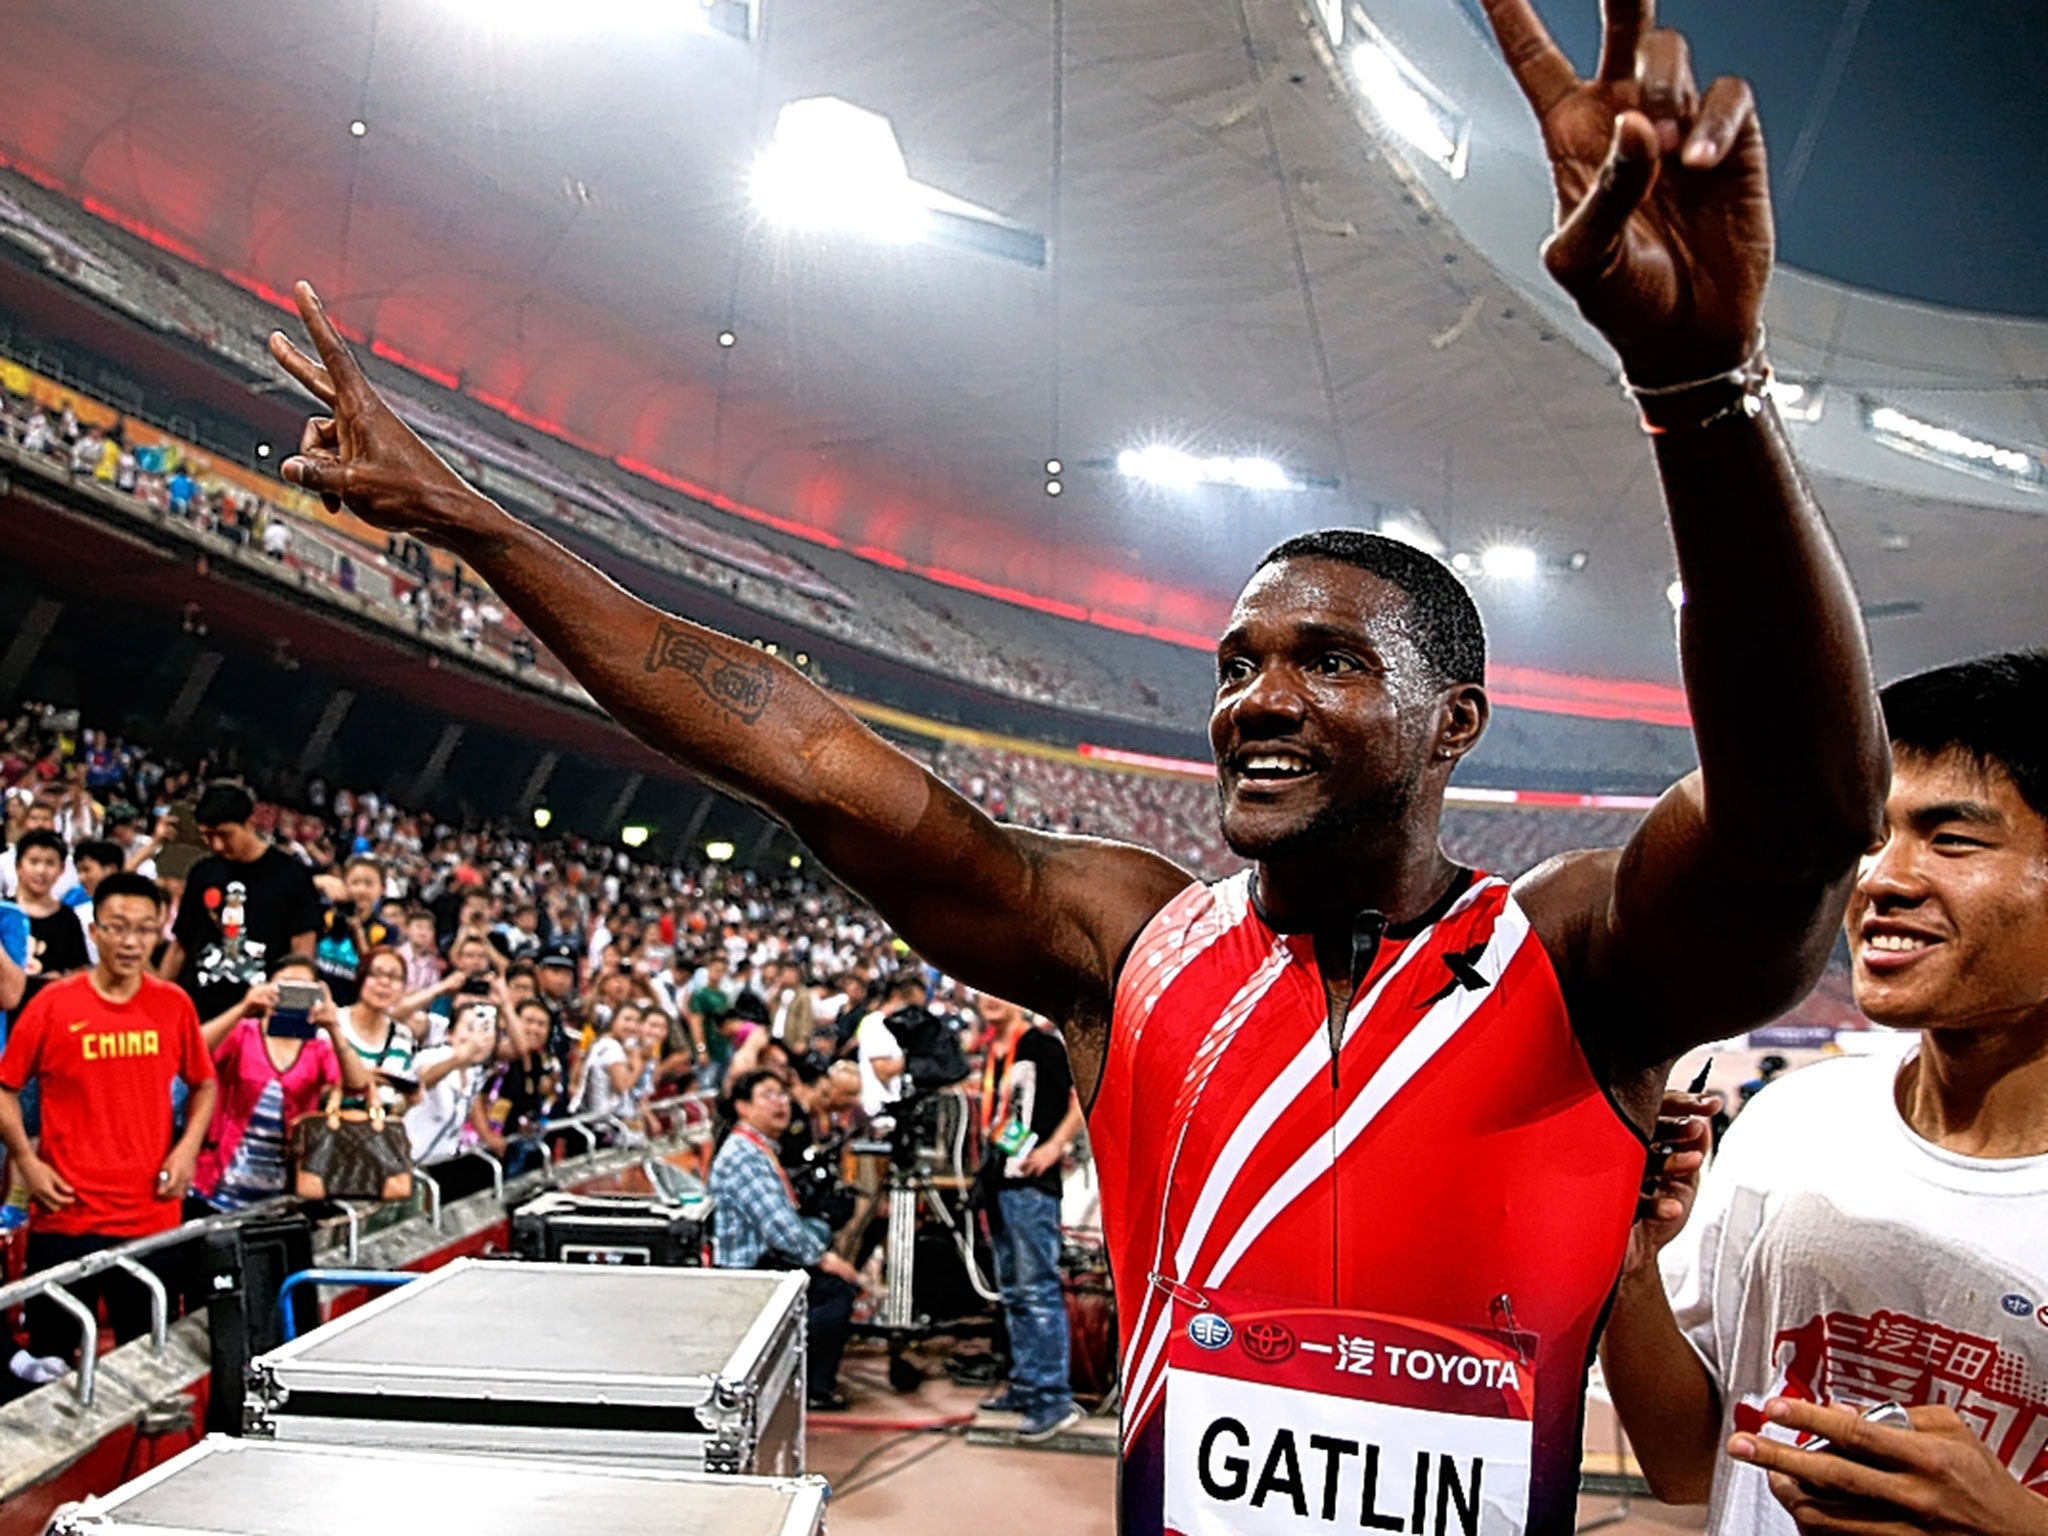 Controversial sprinter Gatlin was recently handed a Nike sponsorship